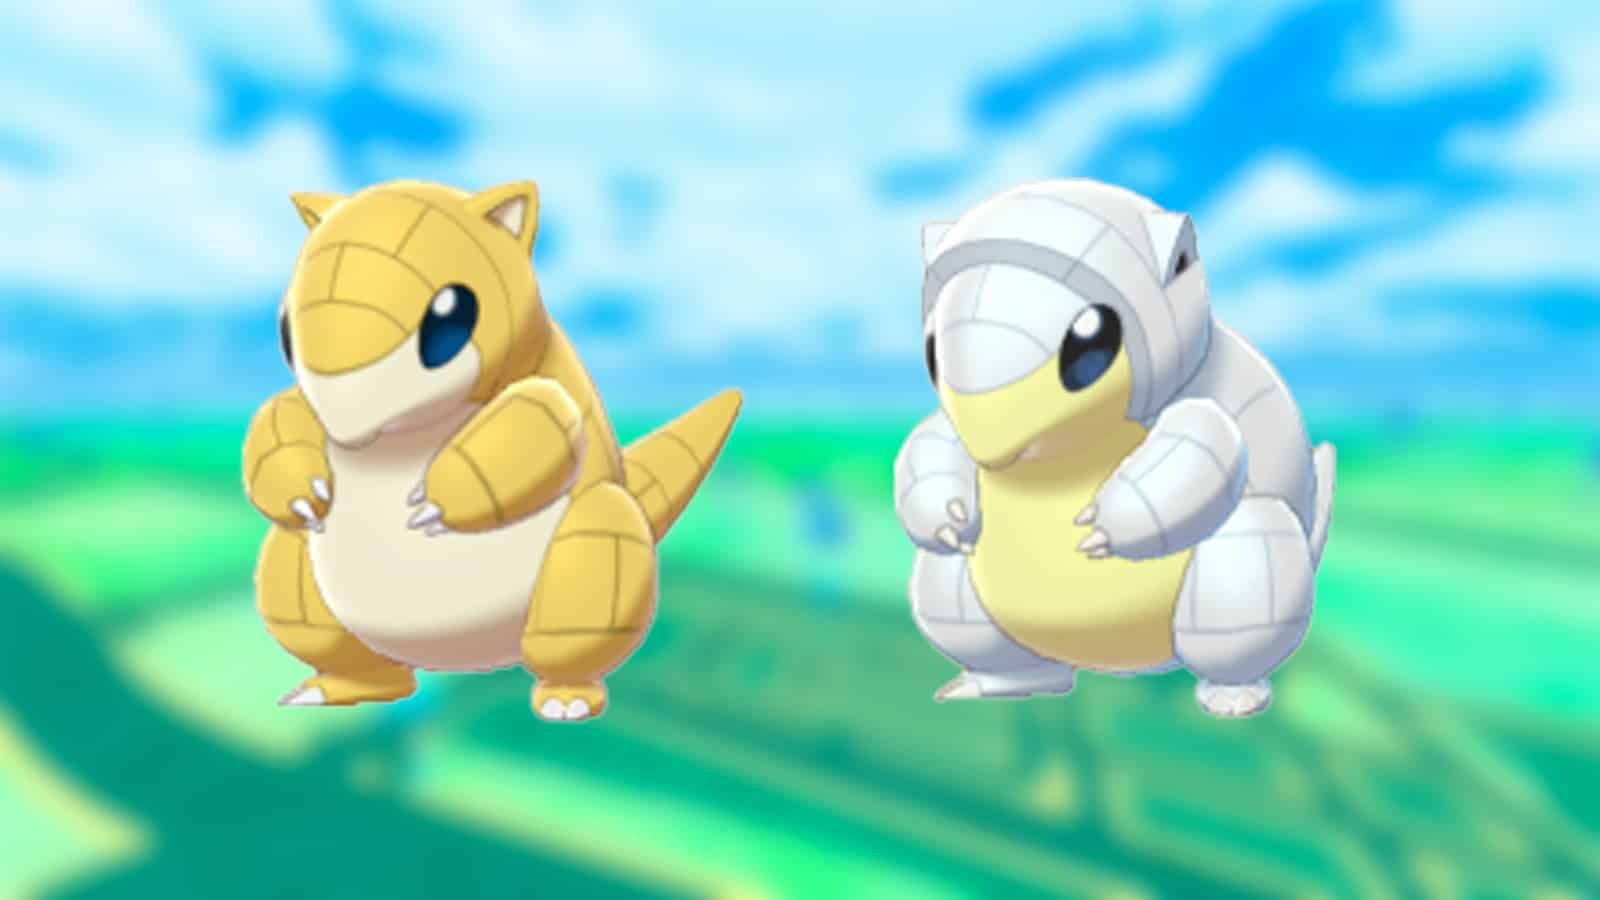 Sandshrew and Alolan Sandshrew appearing in the Pokemon Go Gritty and Glacial Special Research